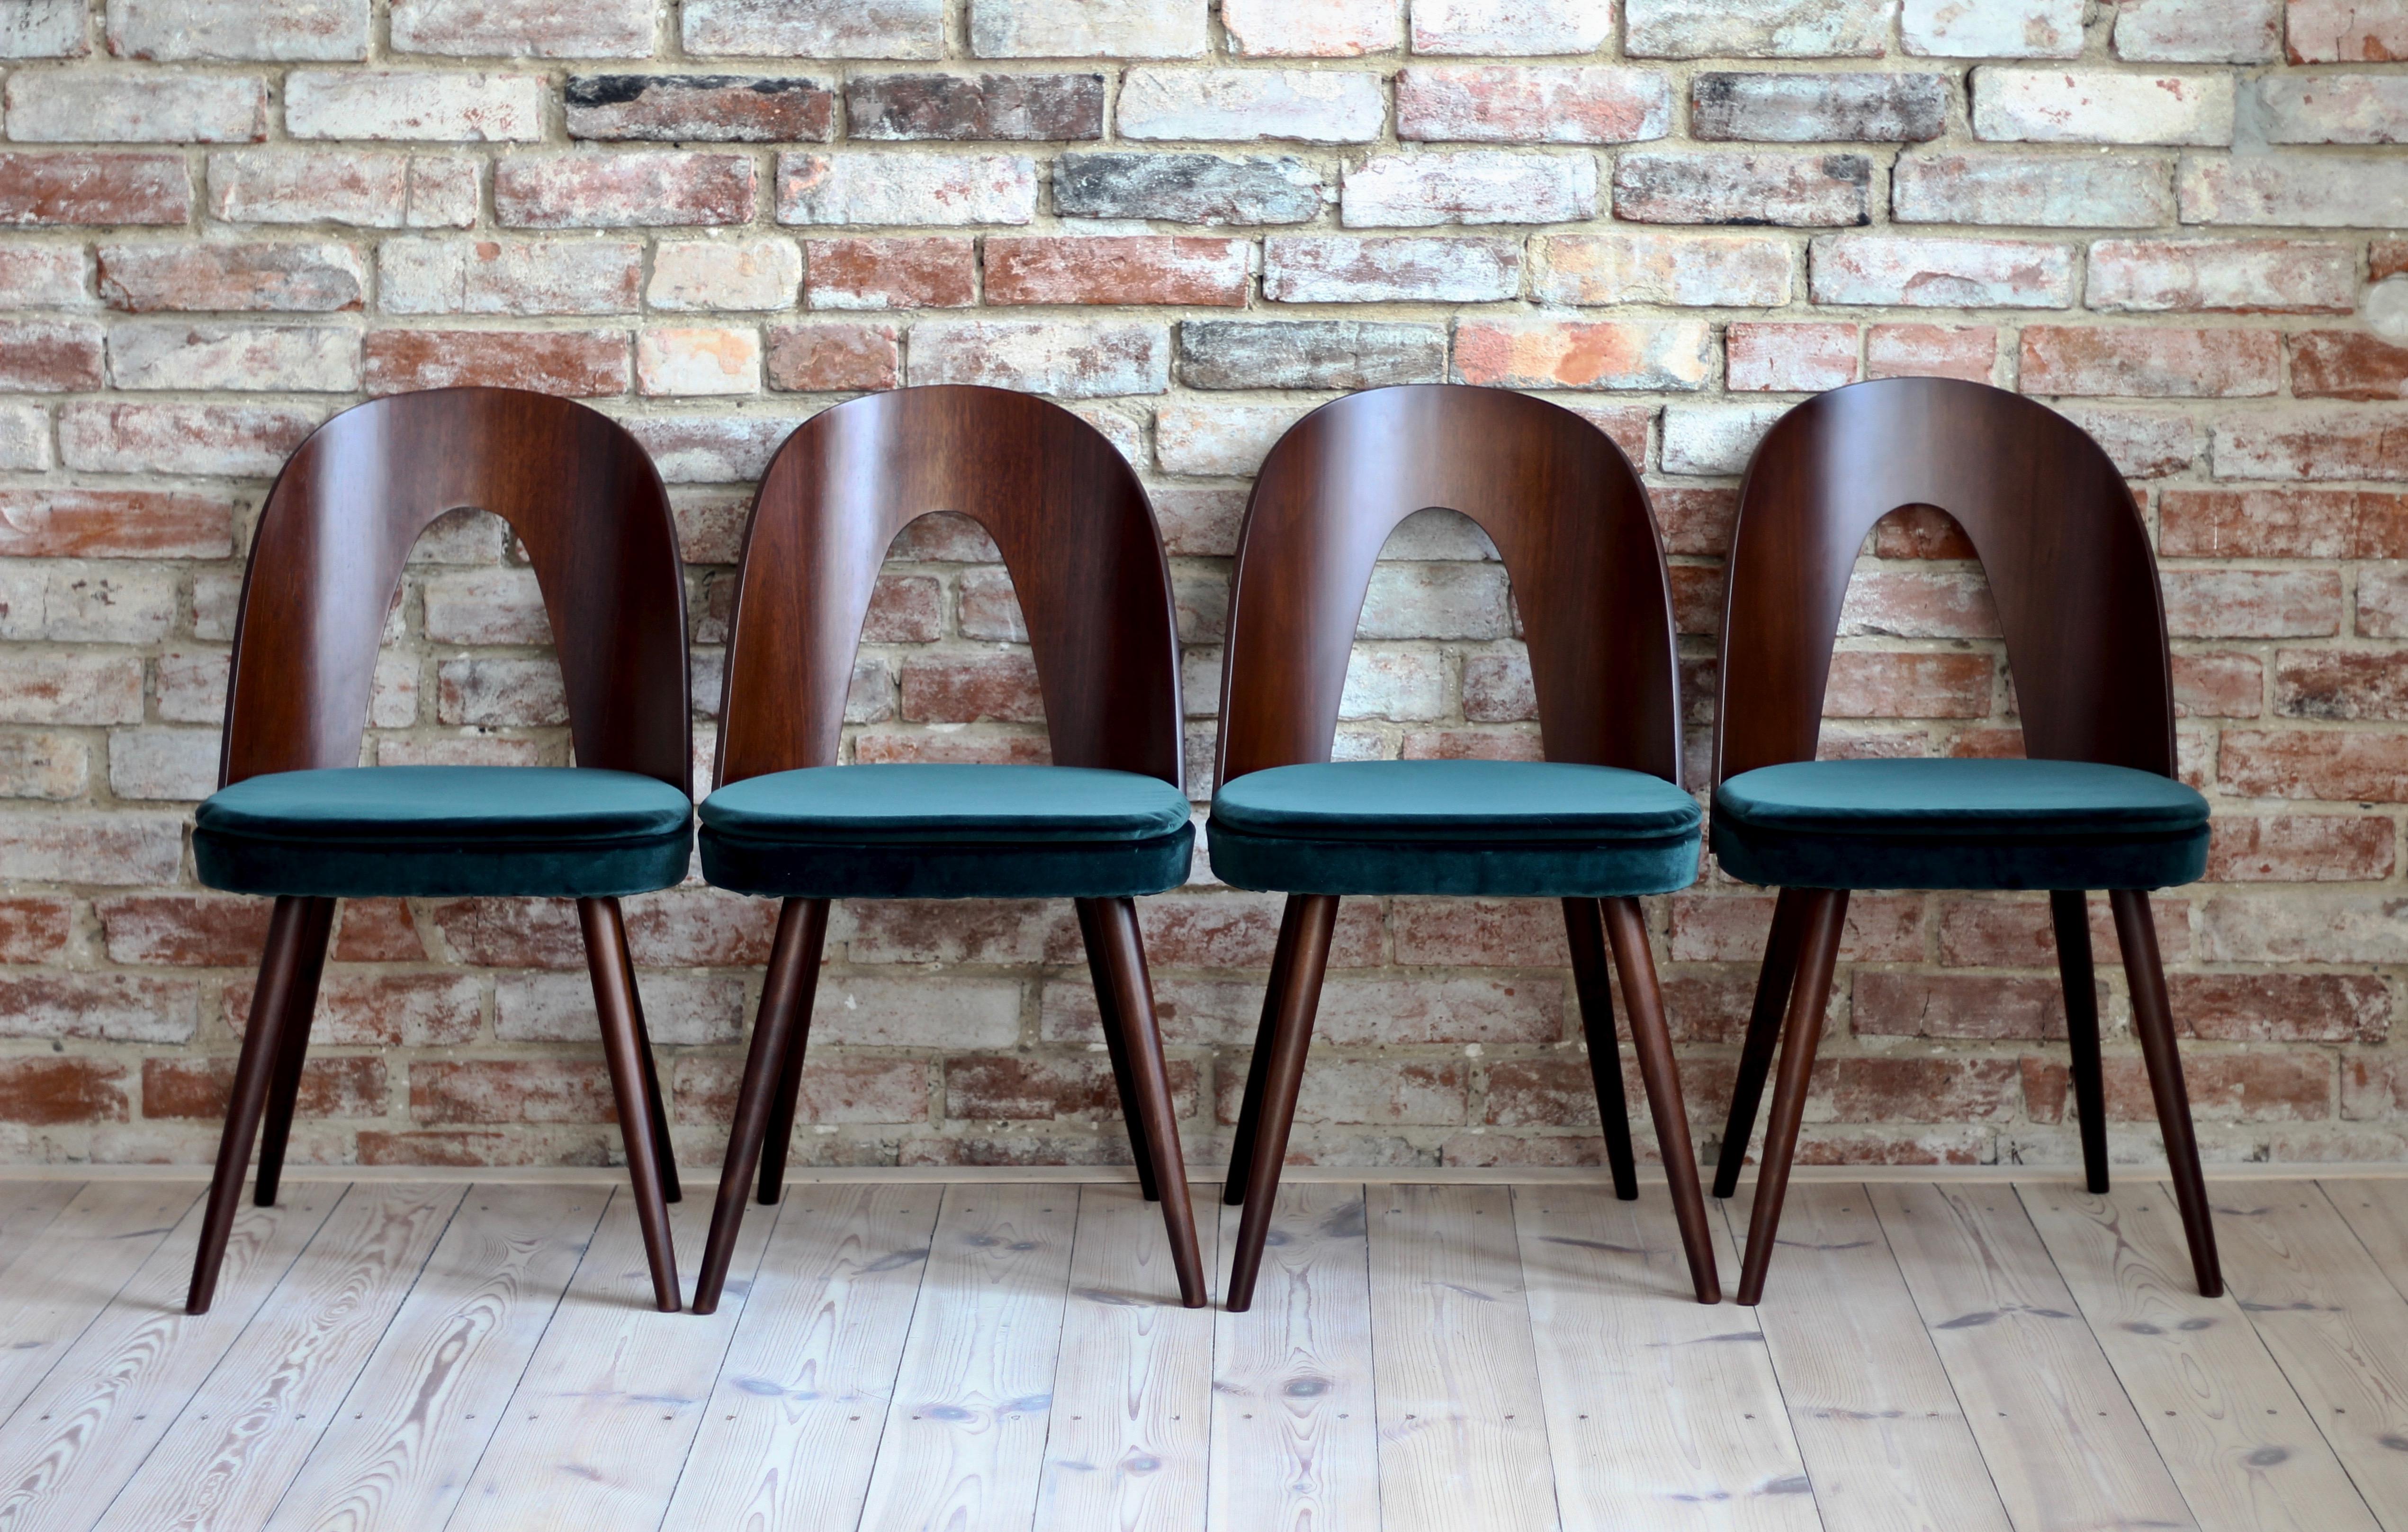 This set of four vintage dining chairs was designed by Czech designer Antonin Šuman in the 1960s. Produced by Tatra Nabytek. The chairs have been completely restored finished in mat lacquer and reupholstered in high-quality fabric from Danish brand